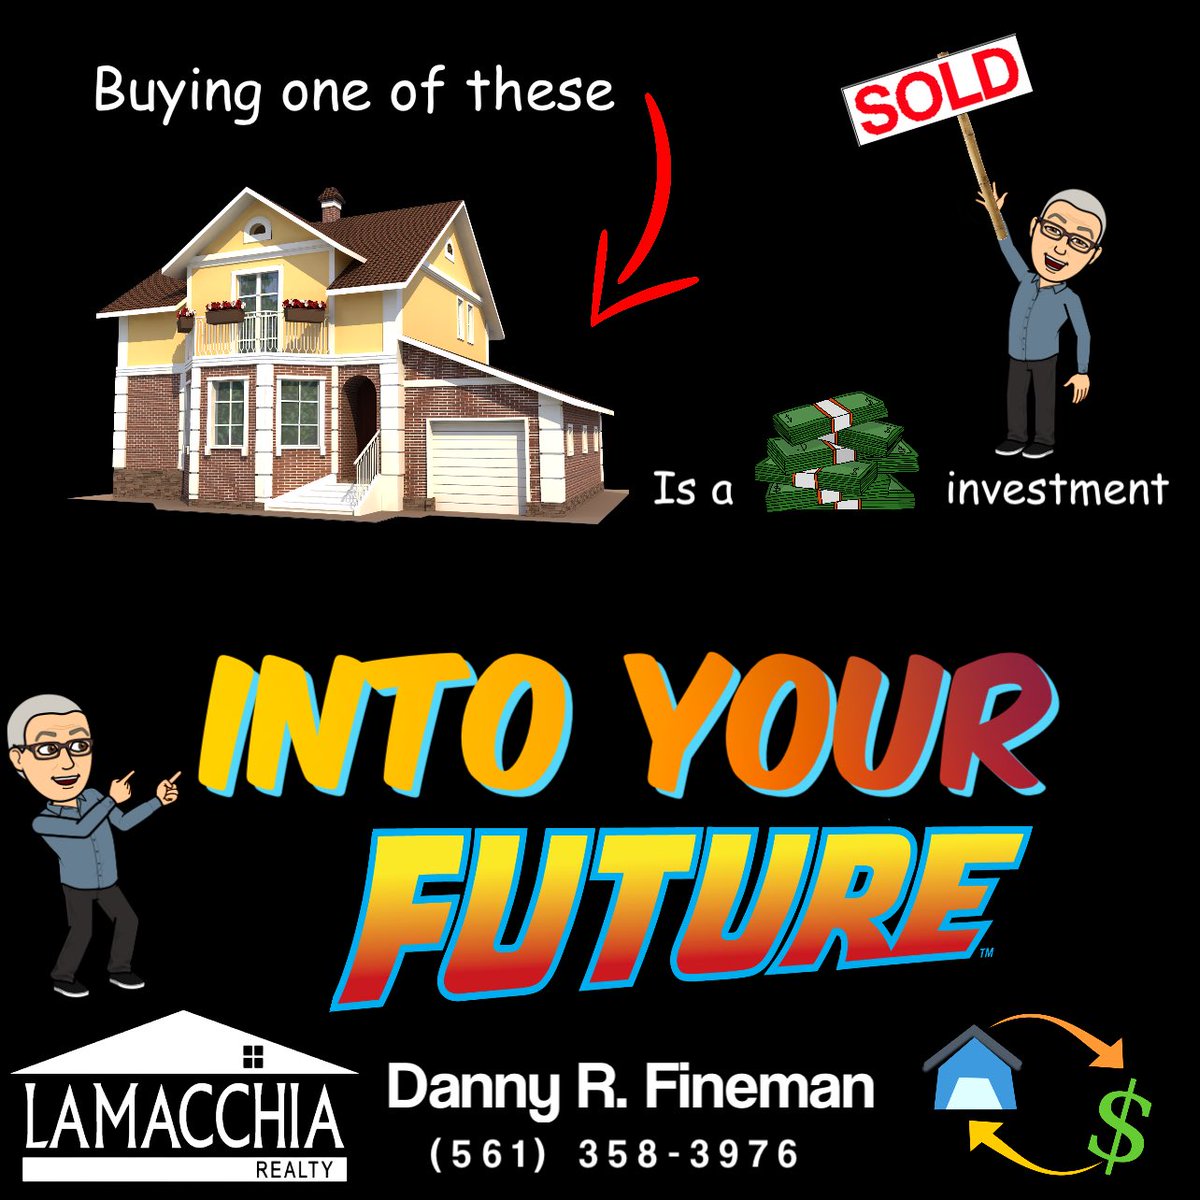 Real estate is a serious business and I take it seriously…but I also have a lot of fun doing it because I LOVE helping people work towards securing their future…
#GetMoreWithLamacchia #LamacchiaRealty #RealEstateAgent   #RealEstateLife   #LamacchiaFlorida  #LamacchiaAgent